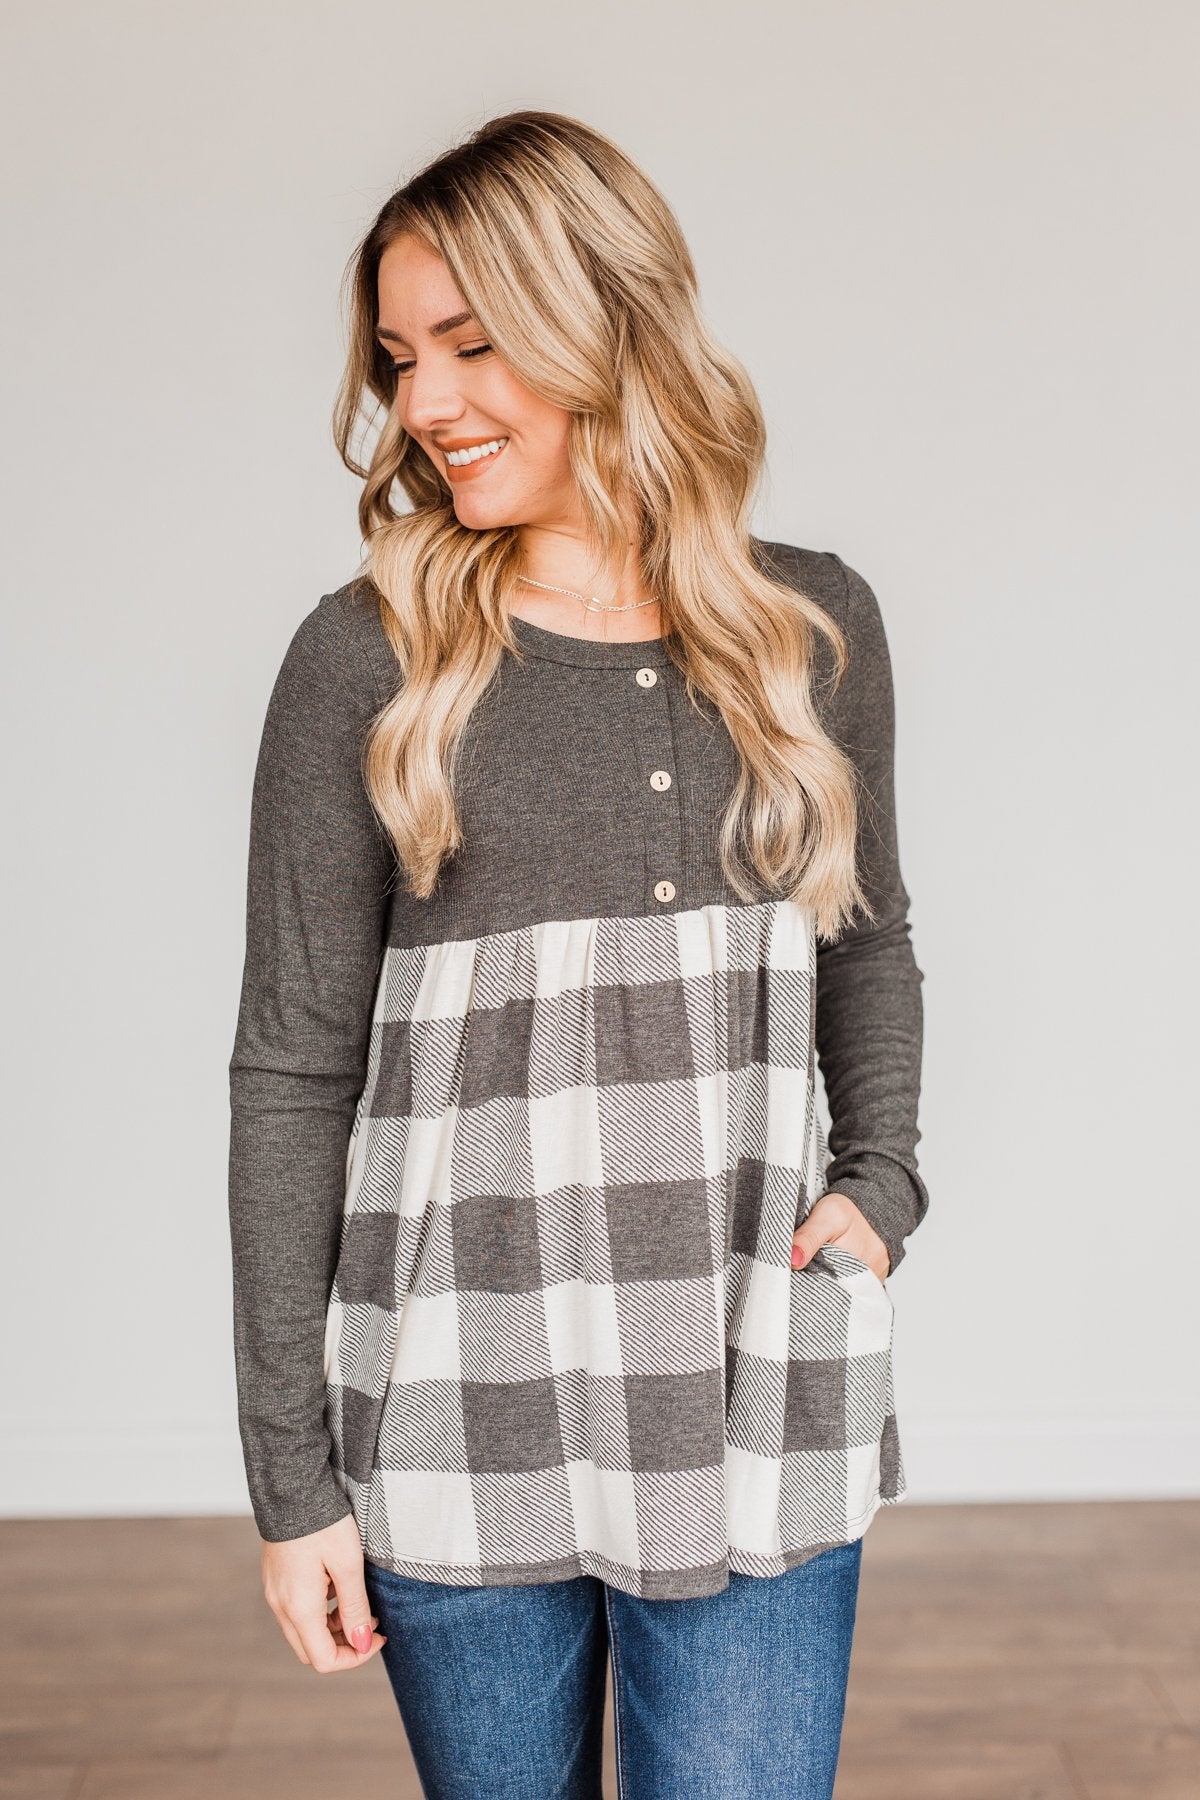 Loving Every Second Plaid Babydoll Top- Charcoal